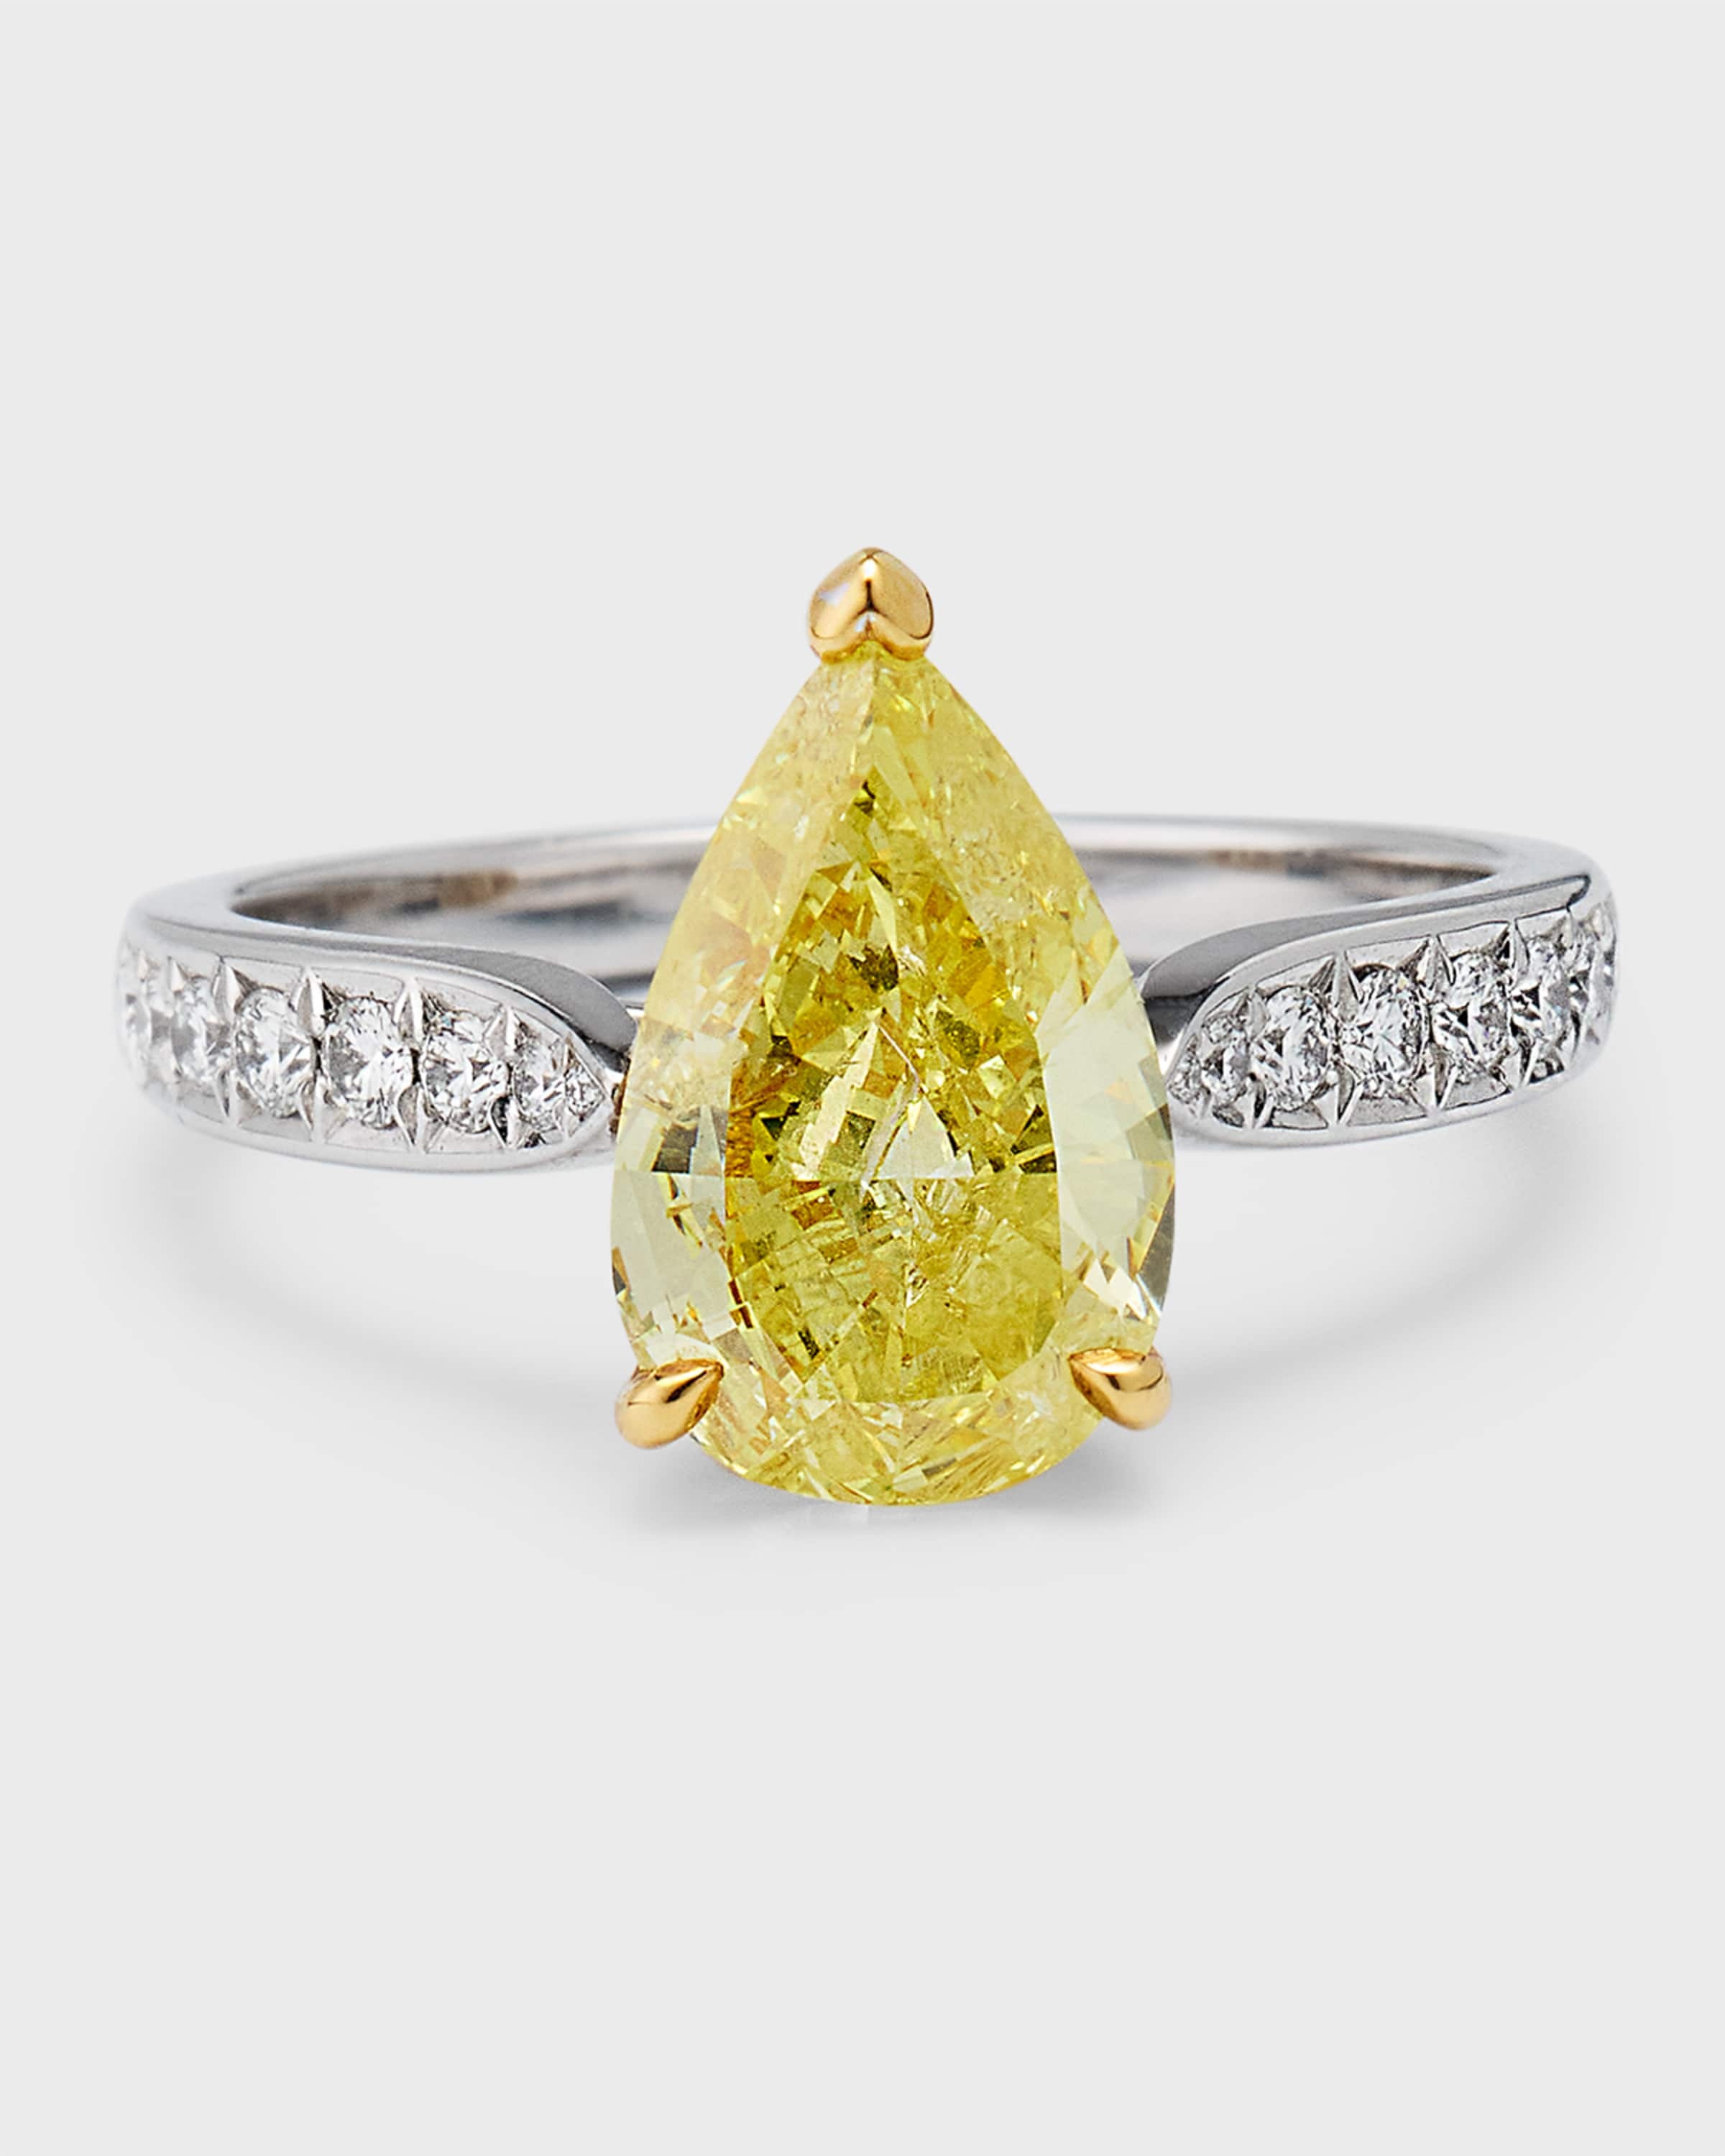 High Jewelry 18K White Gold One-of-a-Kind Yellow Diamond Solitaire Ring - 1